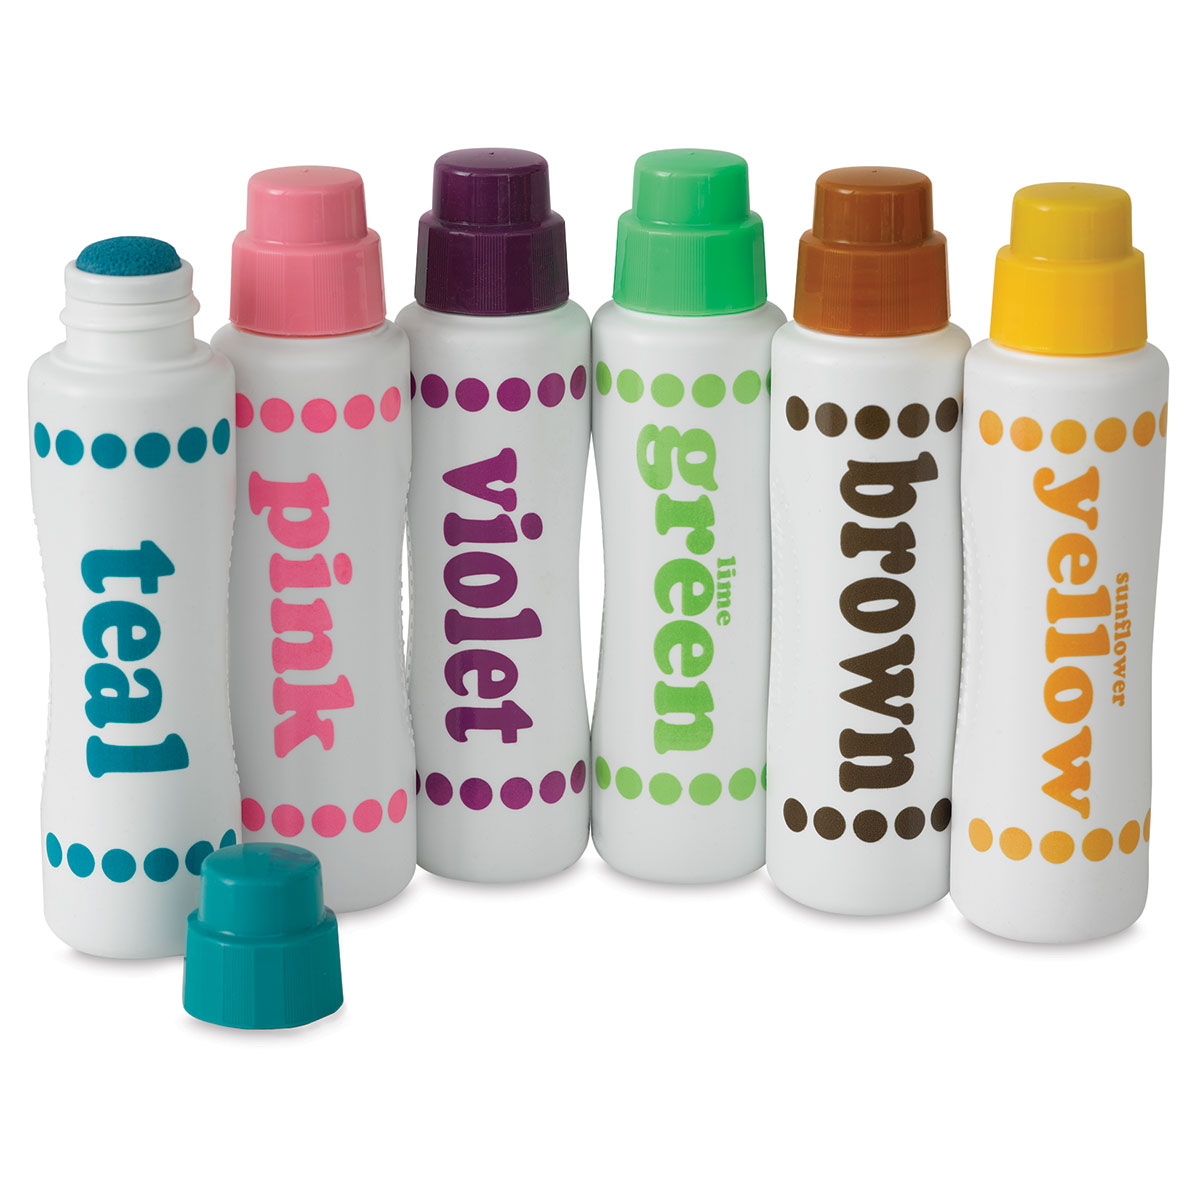 Do-A-Dot Art Washable Markers, Brilliant - 6 pack